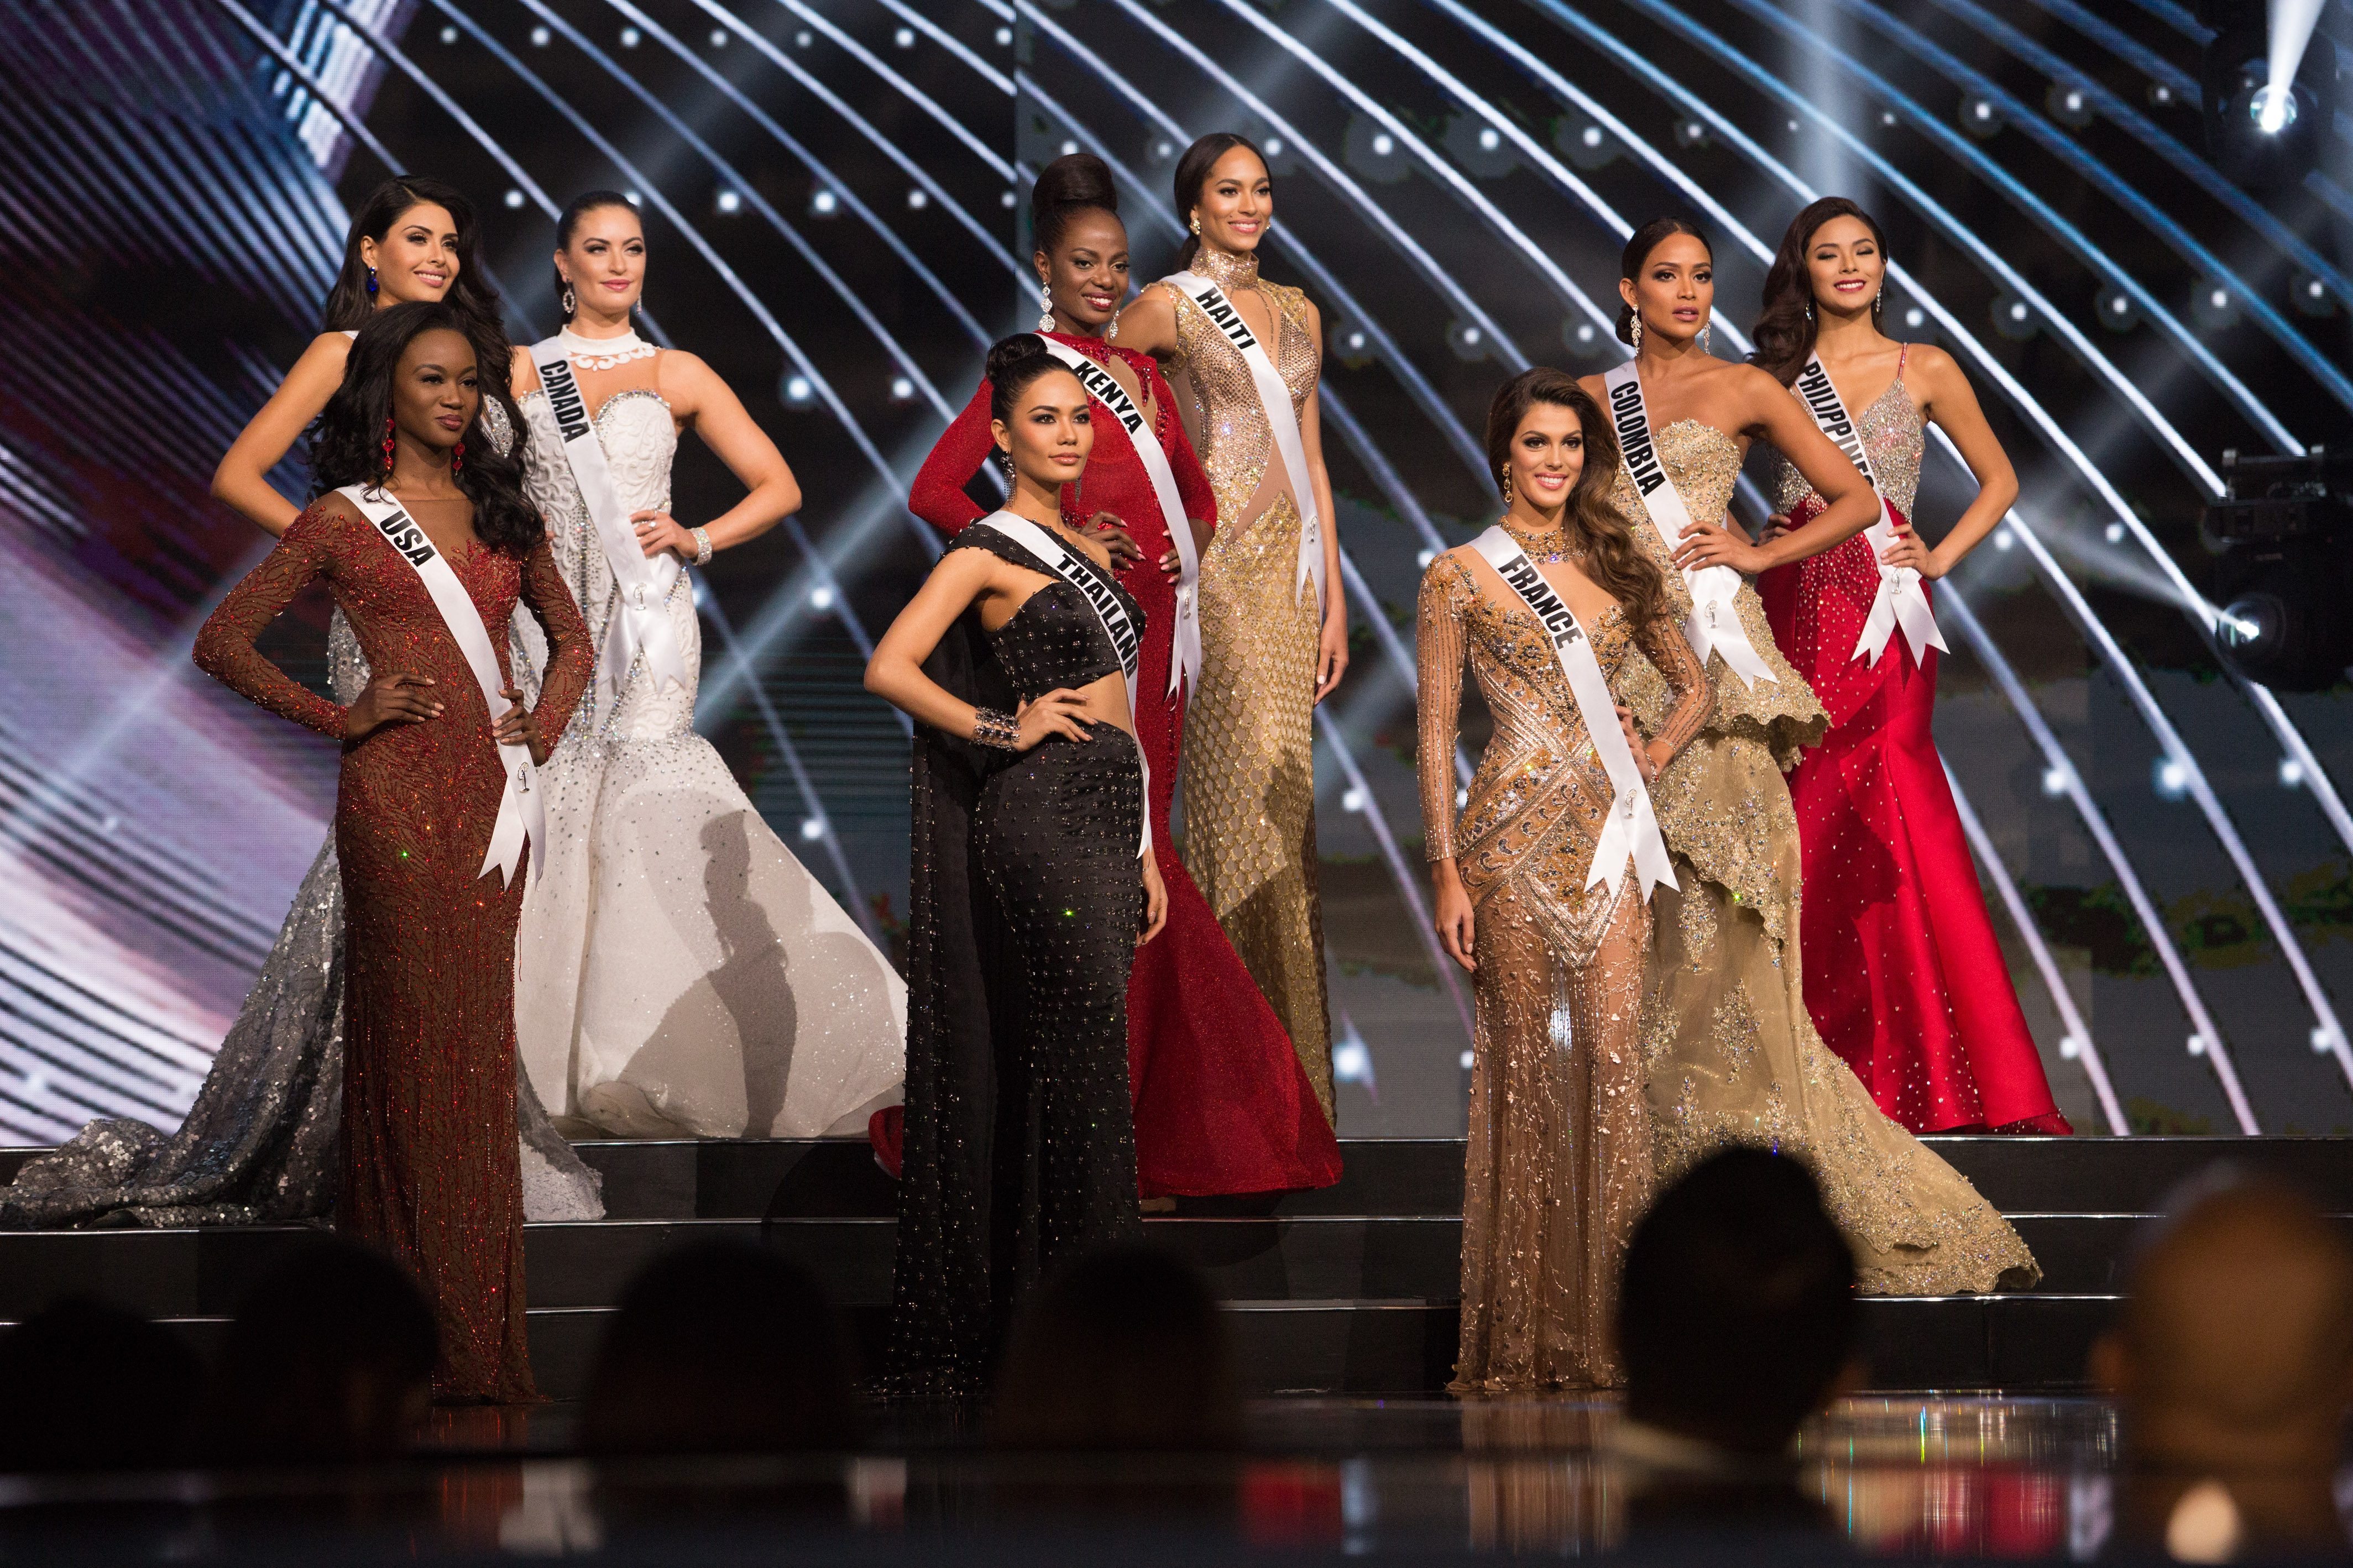 TOP 9. Deshauna Barber, Miss USA 2016; Kristal Silva, Miss Mexico 2016; Siera Bearchell, Miss Canada 2016; Chalita Suansane, Miss Thailand 2016; Mary Esther Were, Miss Kenya 2016; Raquel Pelissier, Miss Haiti 2016; Iris Mittenaere, Miss France 2016; Andrea Tovar, Miss Colombia 2016; and Maxine Medina, Miss Philippines 2016; await to see which of them will be announced as the top 6 finalists during the 65th Miss Universe Telecast. HO/The Miss Universe Organization 